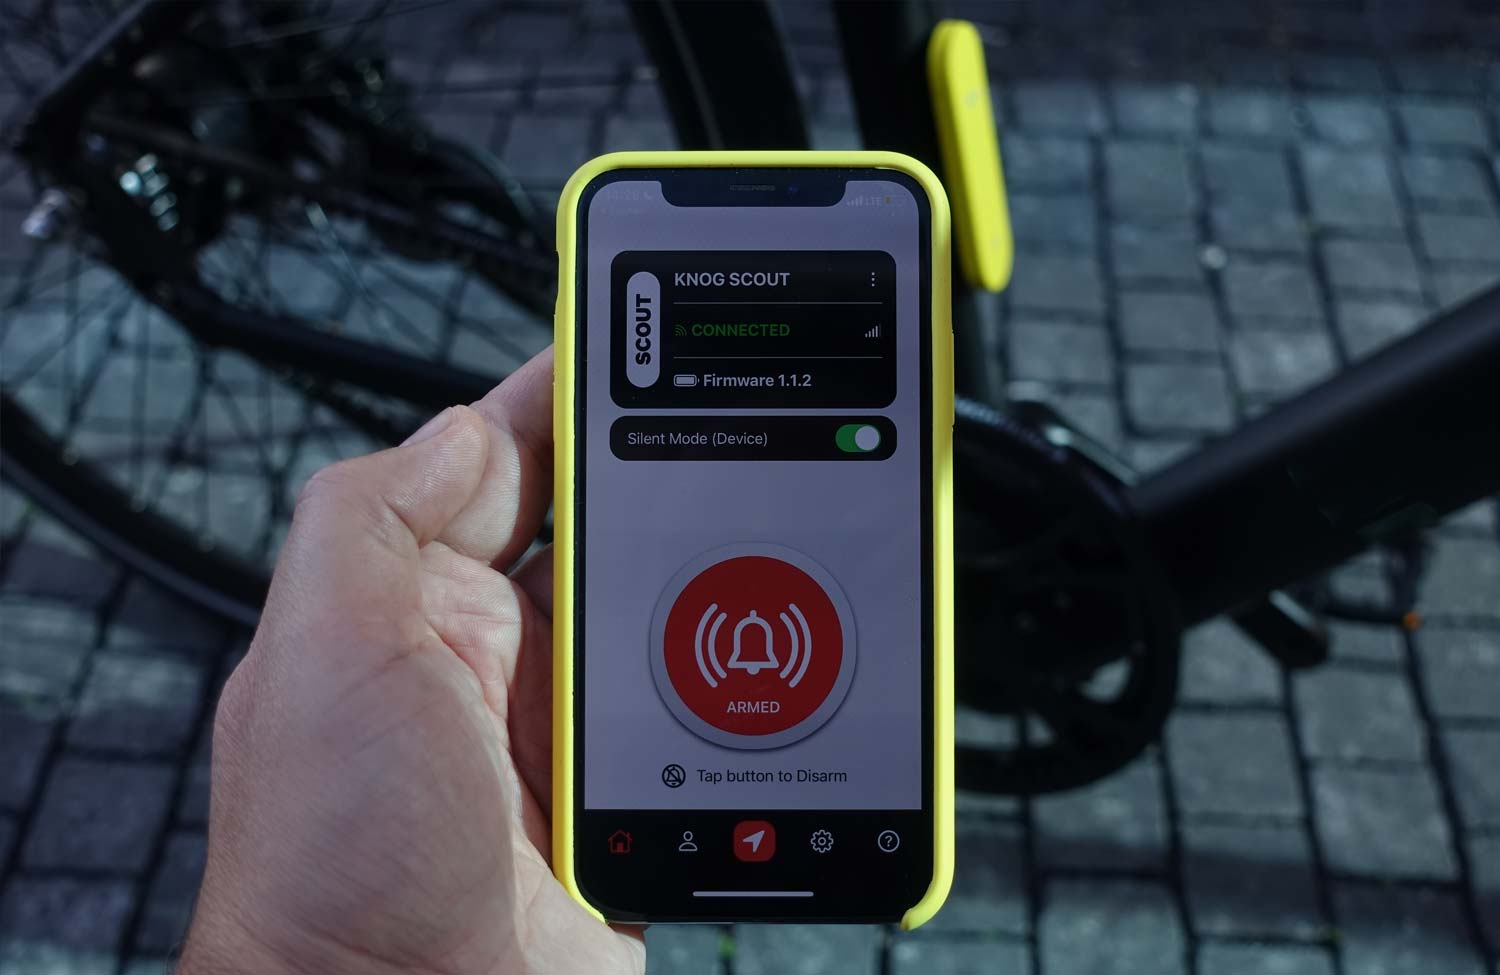 In test: Knog Scout, the low-cost bicycle alarm system with built